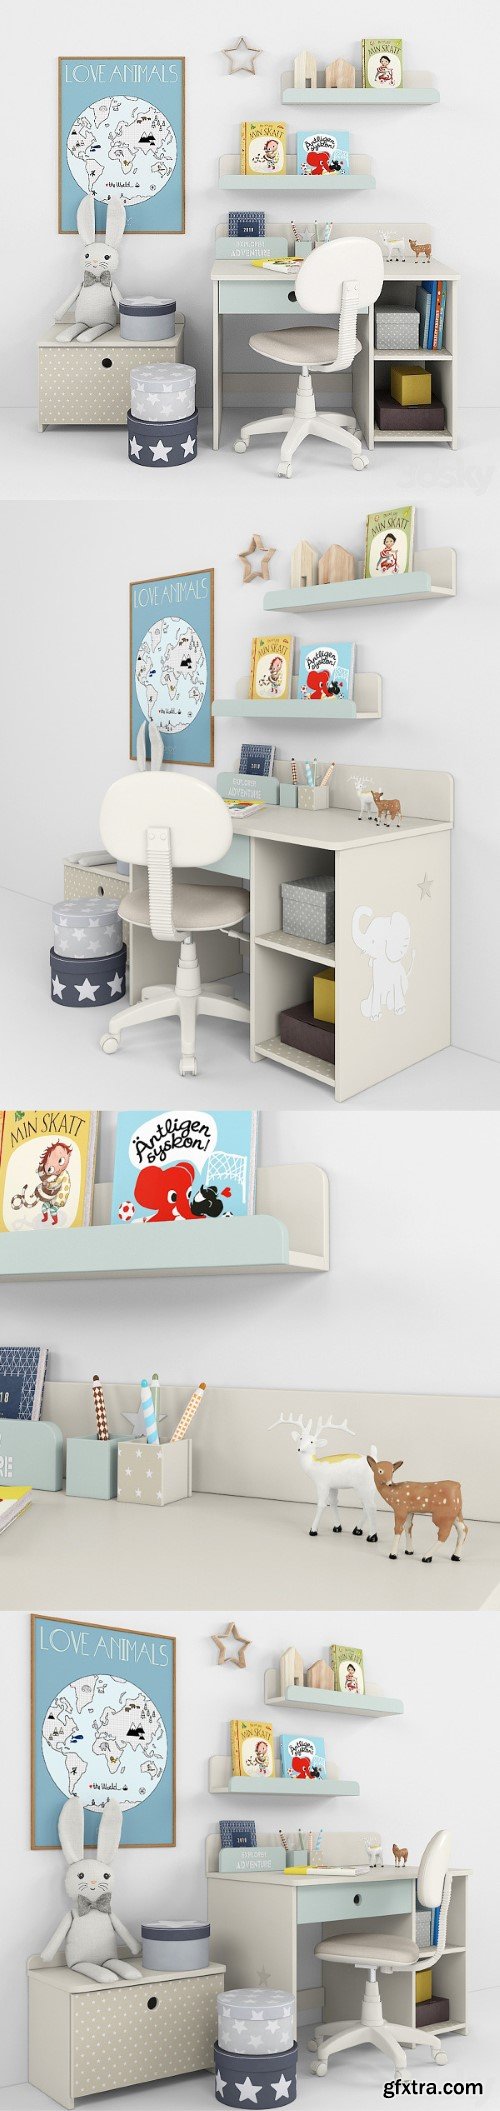 Pro 3DSky - Writing-table and decor for a nursery 12